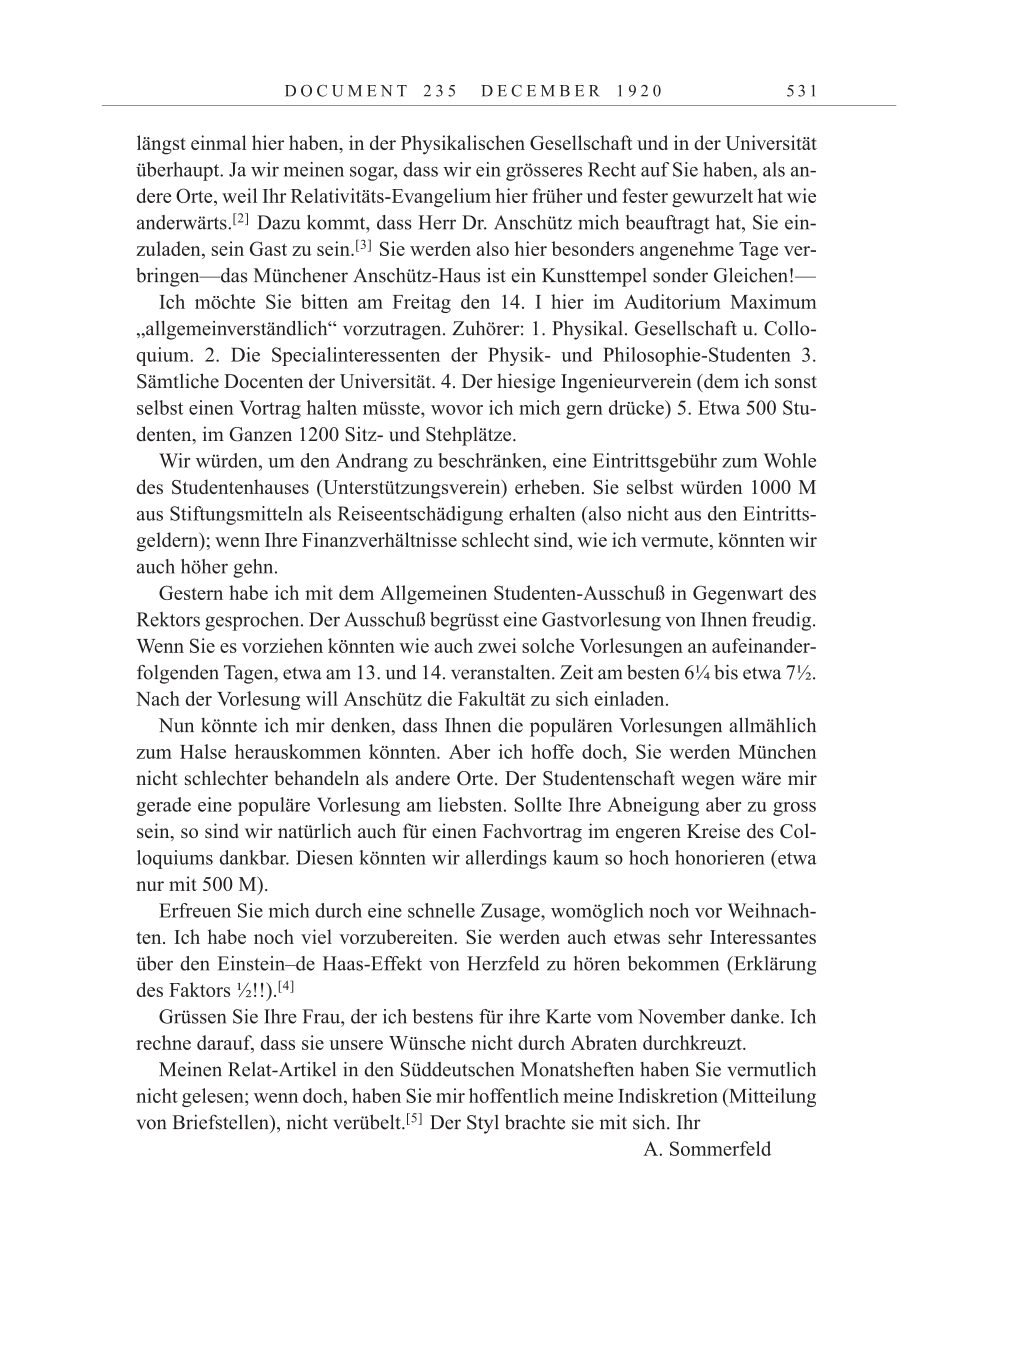 Volume 10: The Berlin Years: Correspondence May-December 1920 / Supplementary Correspondence 1909-1920 page 531